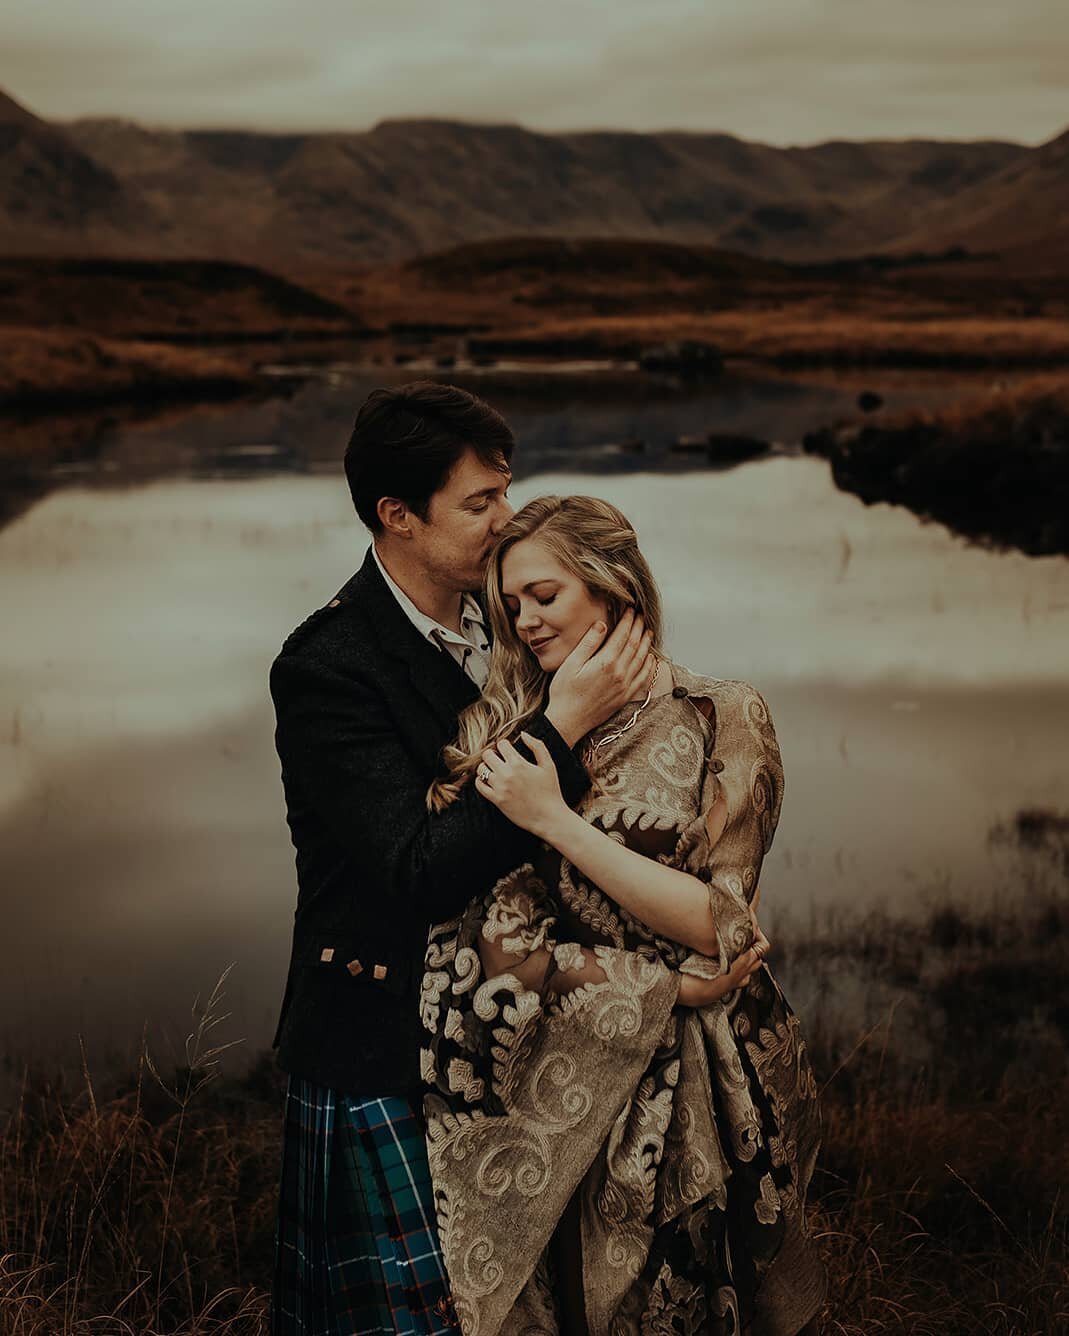 An elopement is not just saying &quot;YES&quot; to that person you want to spend the rest of your life with, it's also saying &quot;YES&quot; to adventure! 😍 .
Let's adventure at some magical places in Europe together! ☄
.
.
.
#glencoe #highlands #s